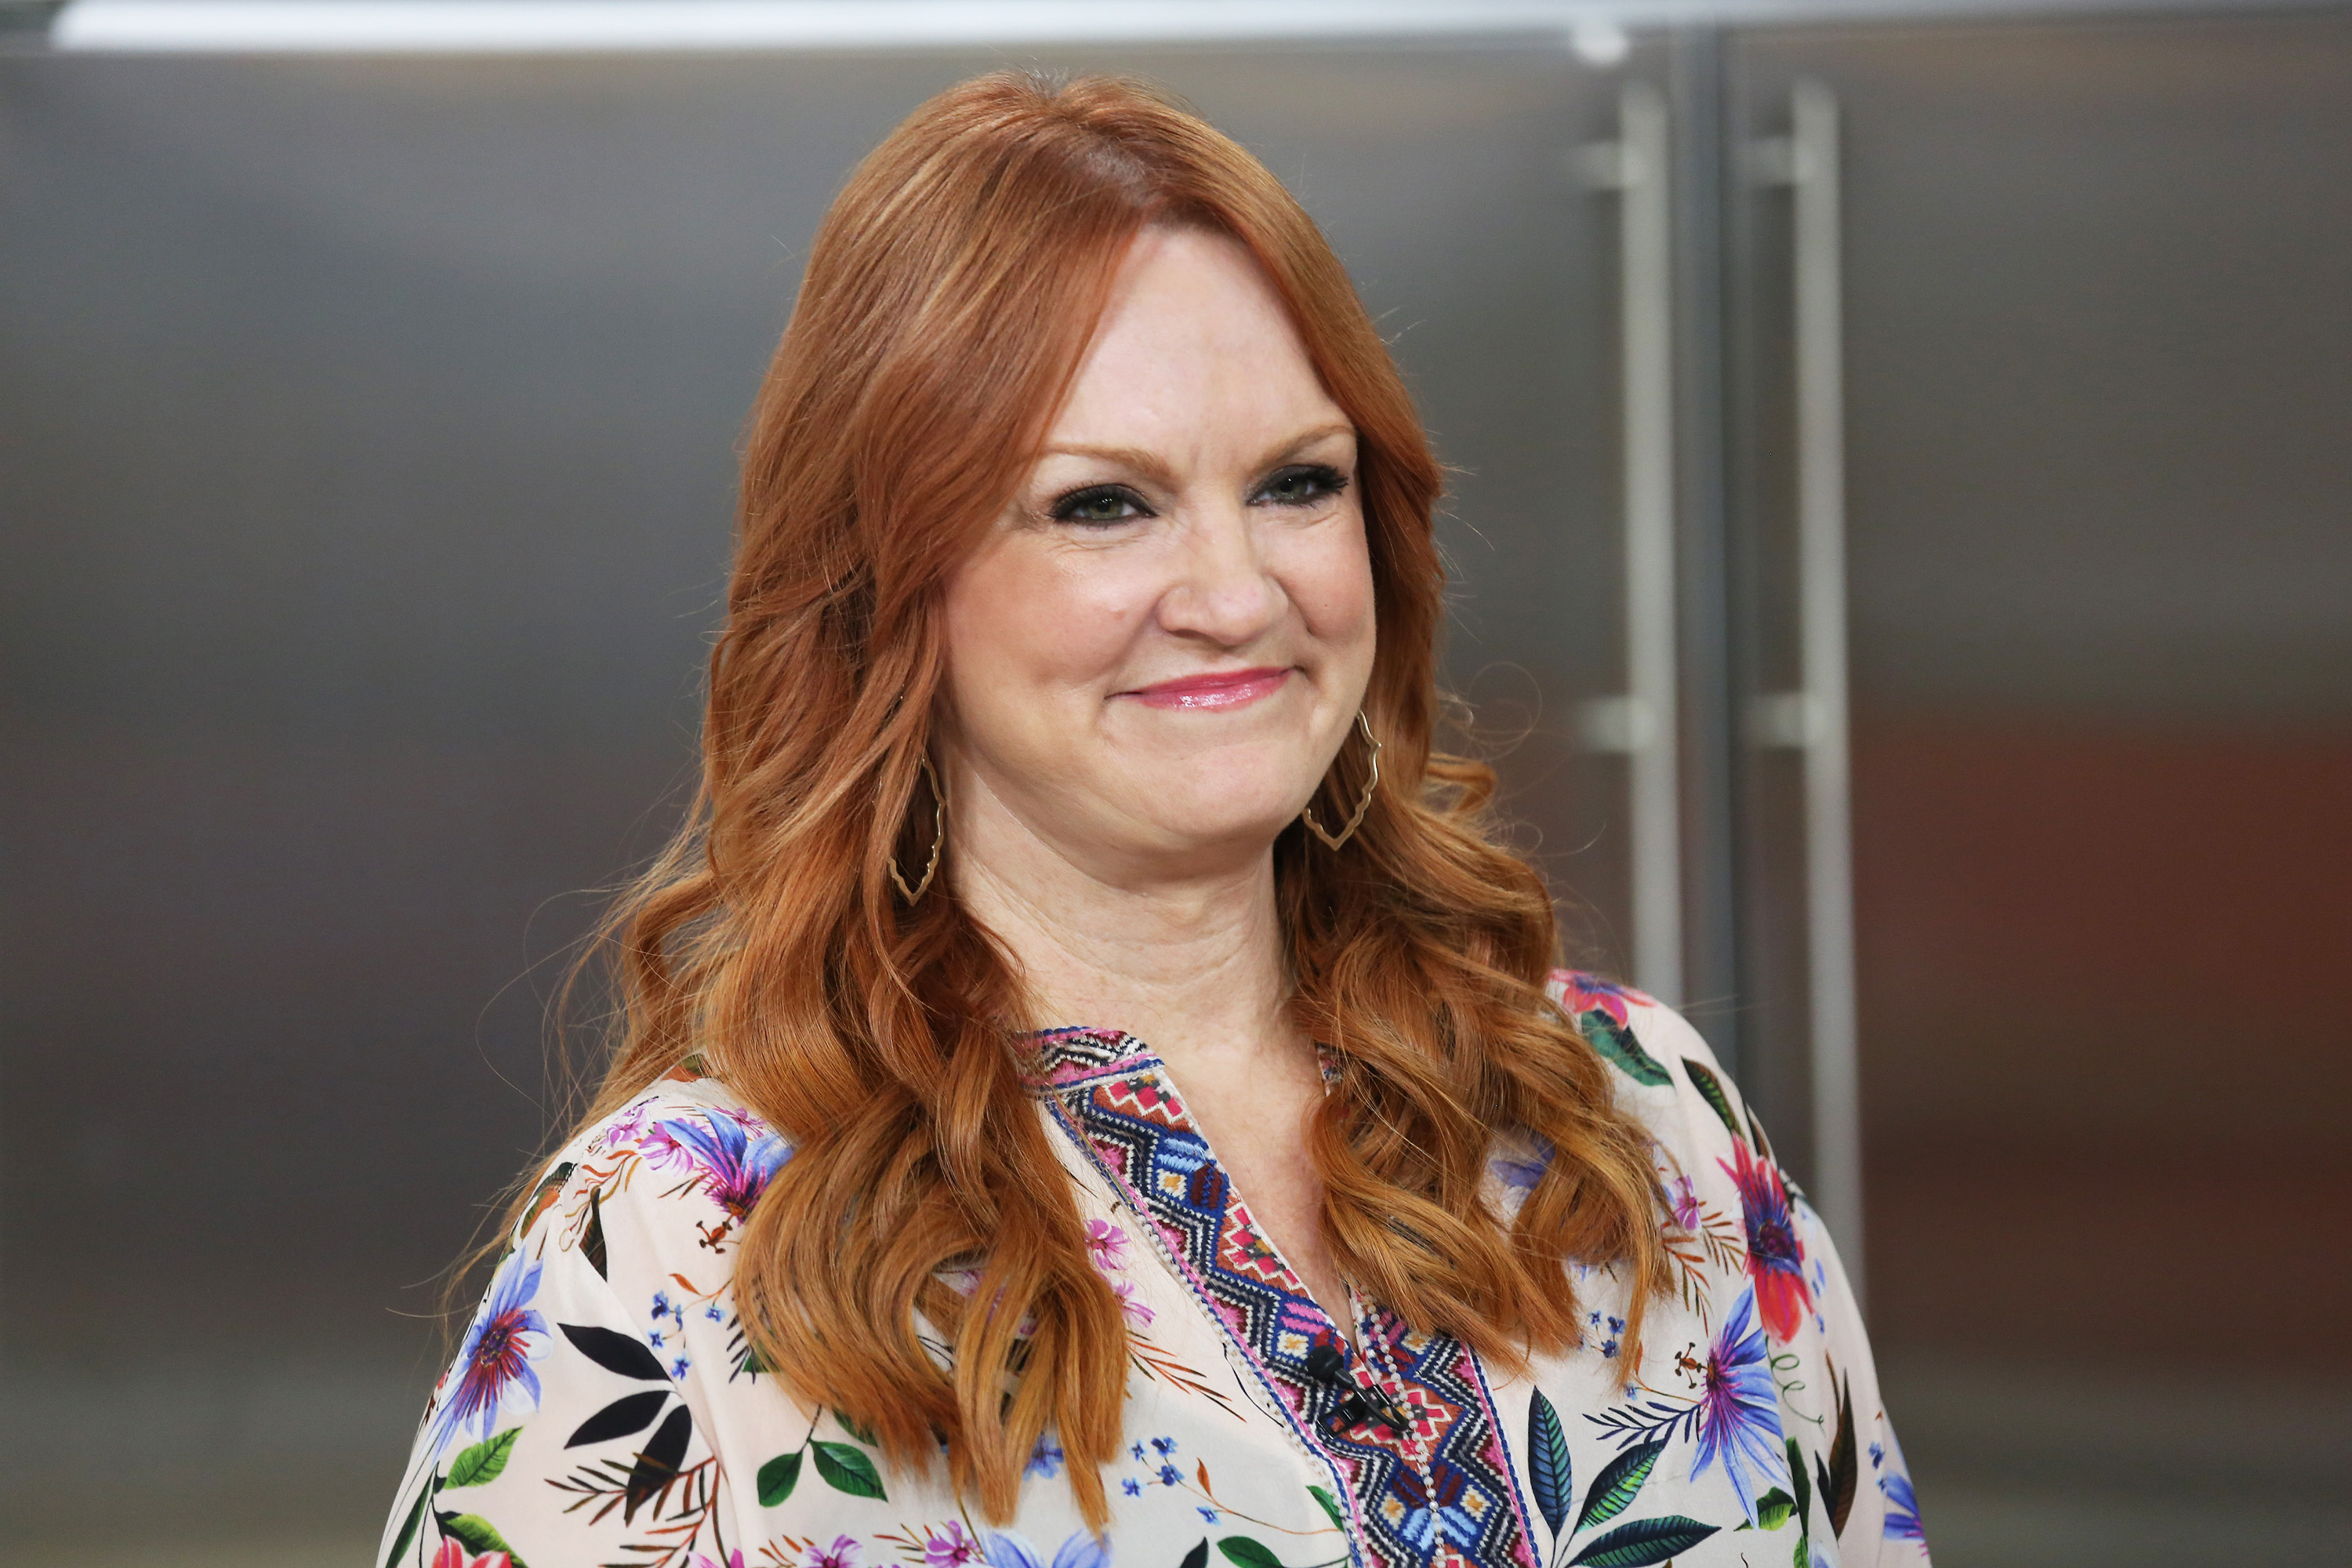 The Pioneer Woman Ree Drummond shares her recipes on the 'Today' show. | Tyler Essary/NBC/NBCU Photo Bank via Getty Images